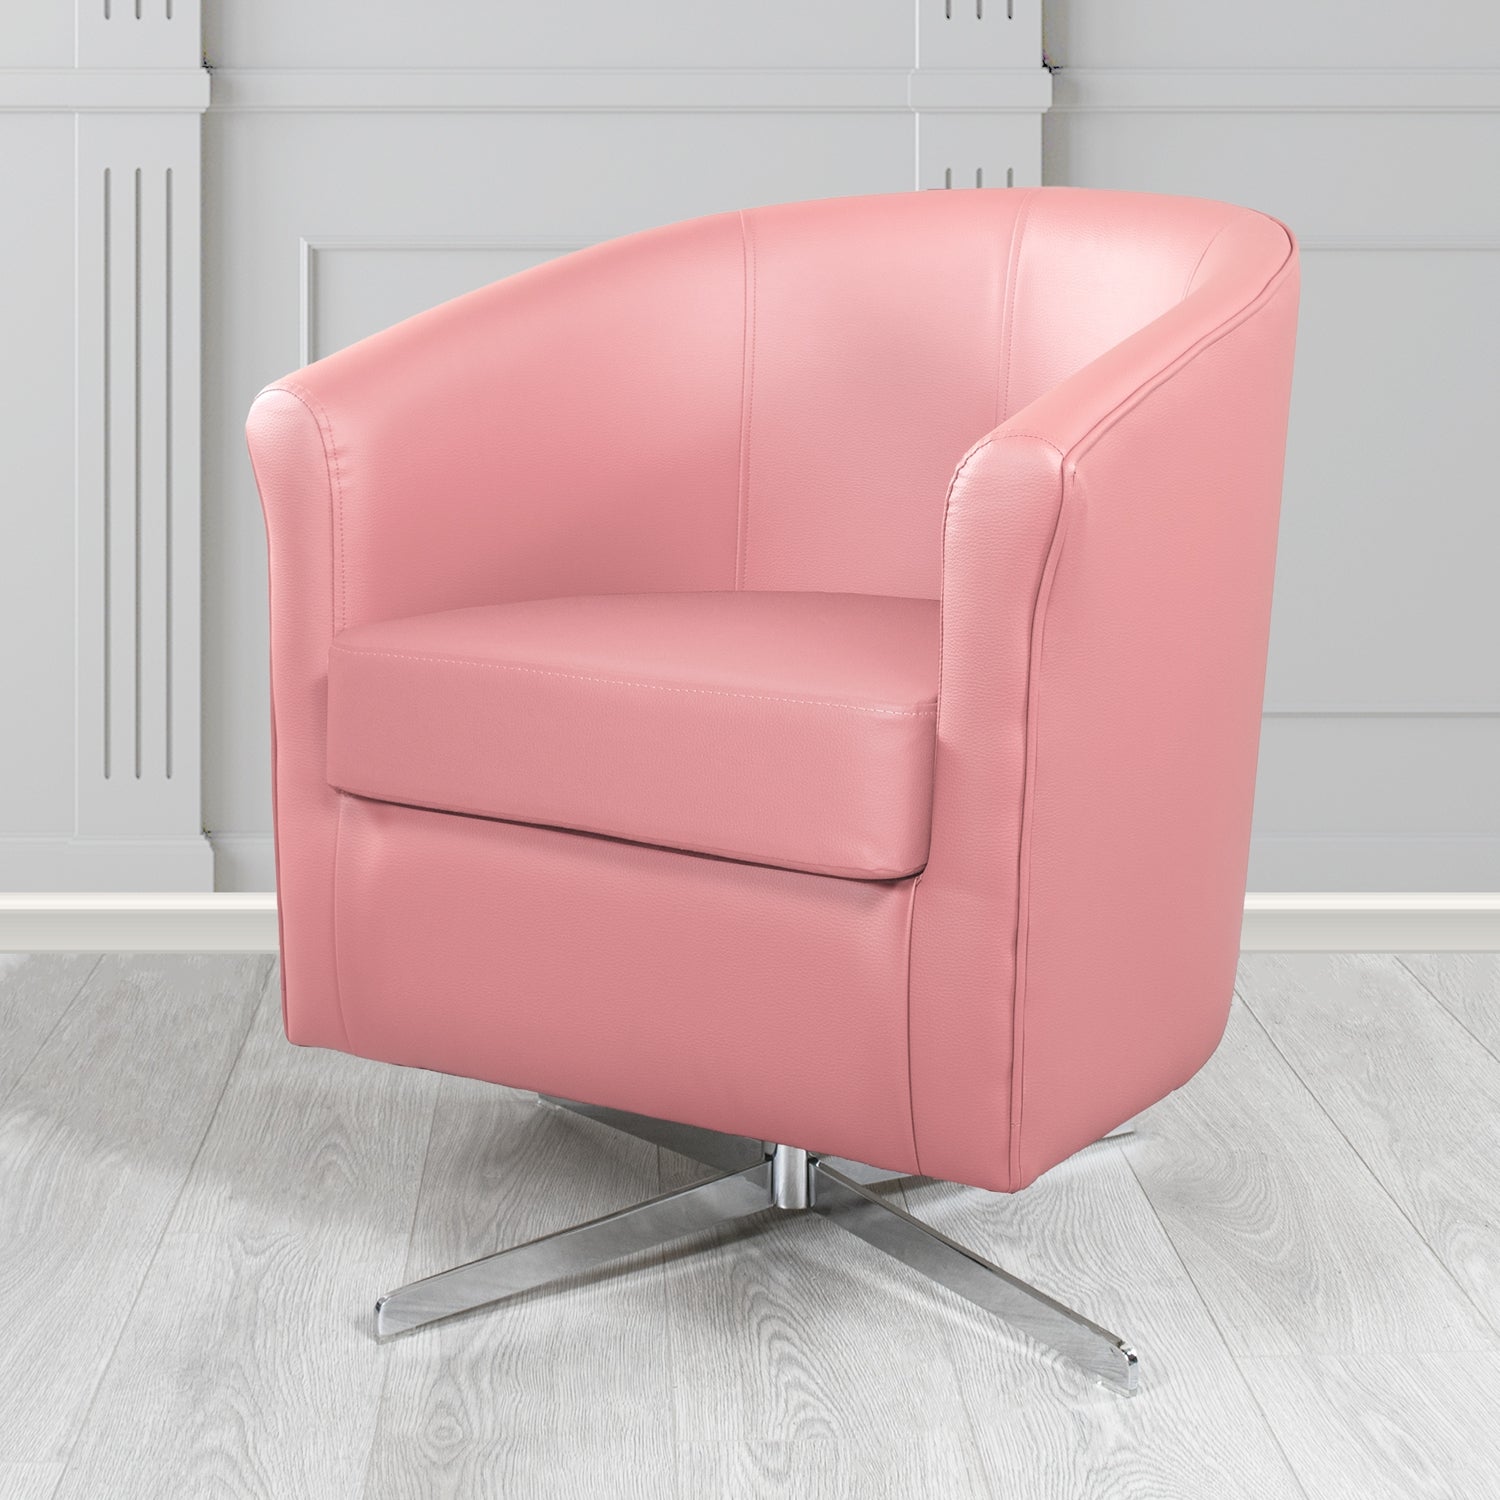 Cannes Swivel Tub Chair in Just Colour Cherry Blossom Crib 5 Faux Leather